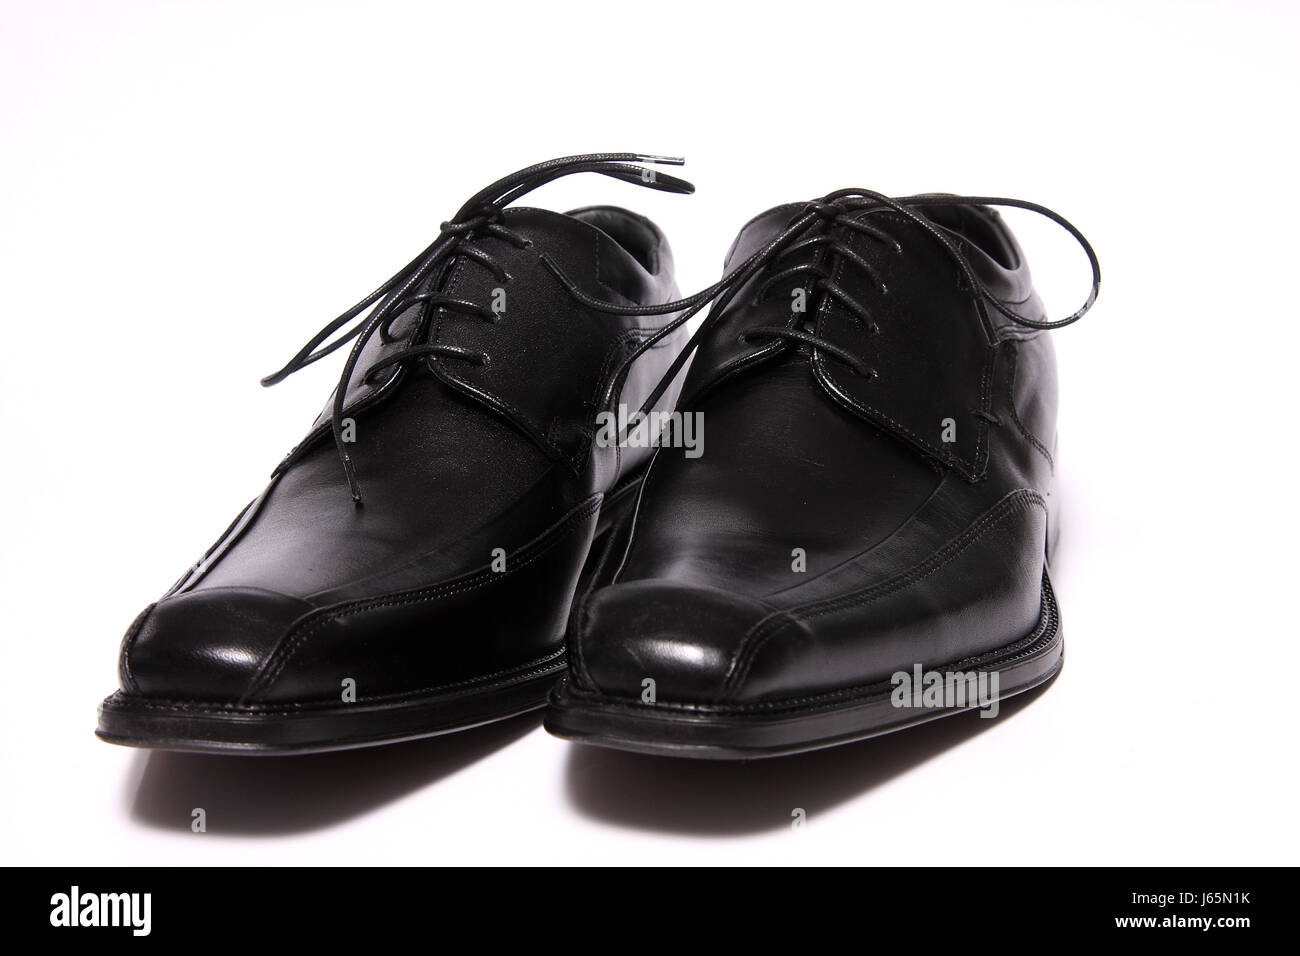 black swarthy jetblack deep black shoes leather business dealings deal business Stock Photo